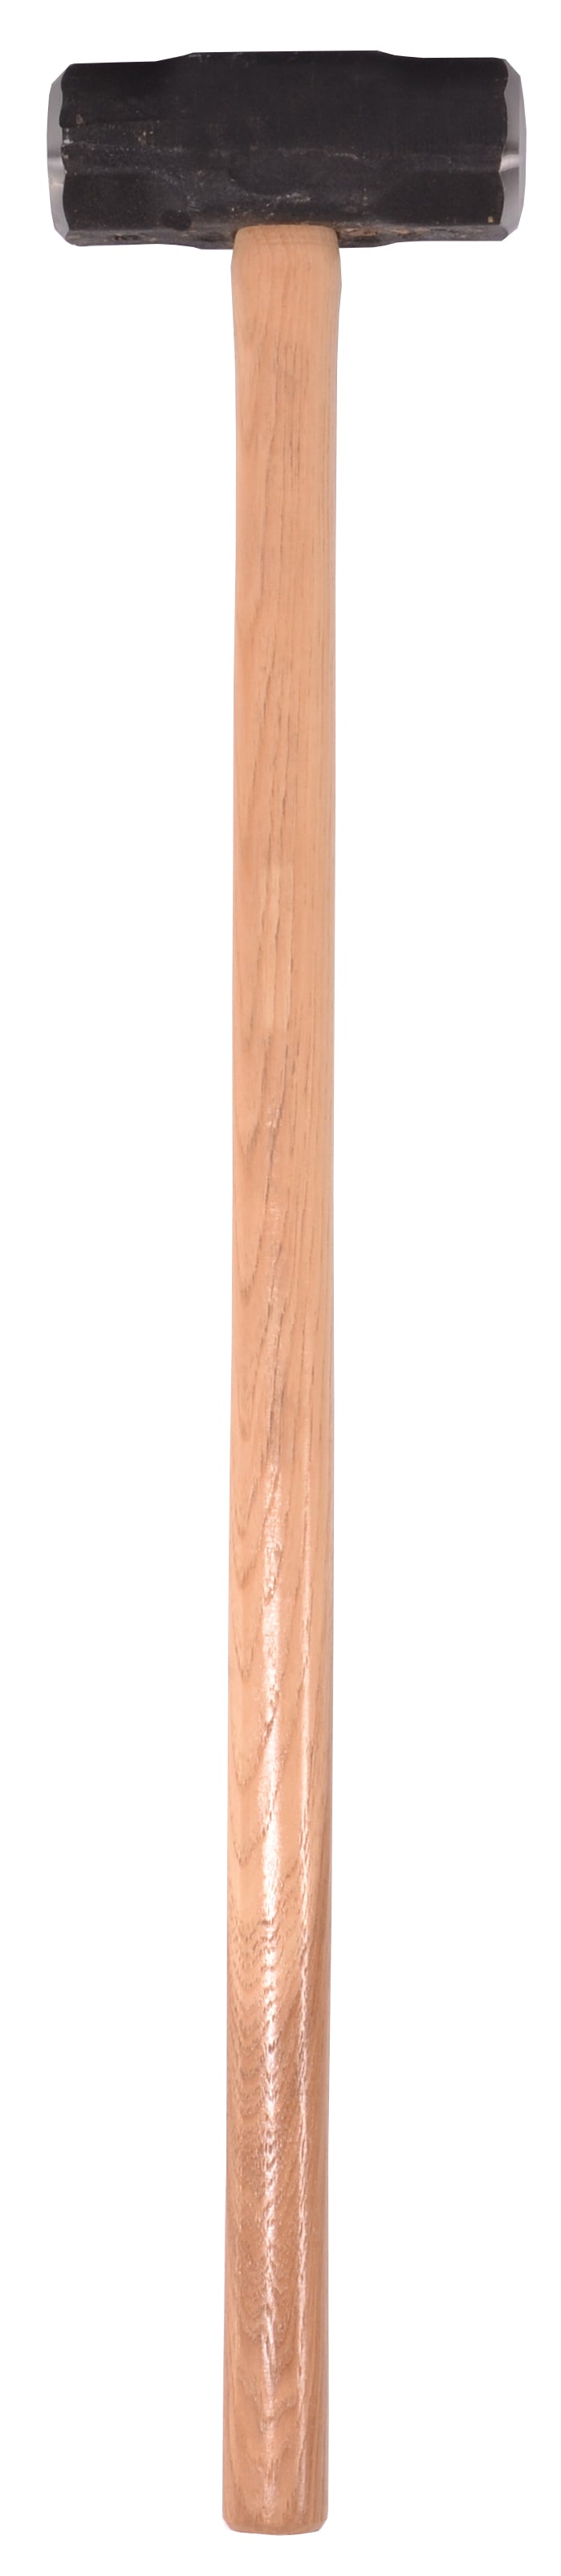 Sledge hammer, 10 lbs, 36" hickory hdle, UAP